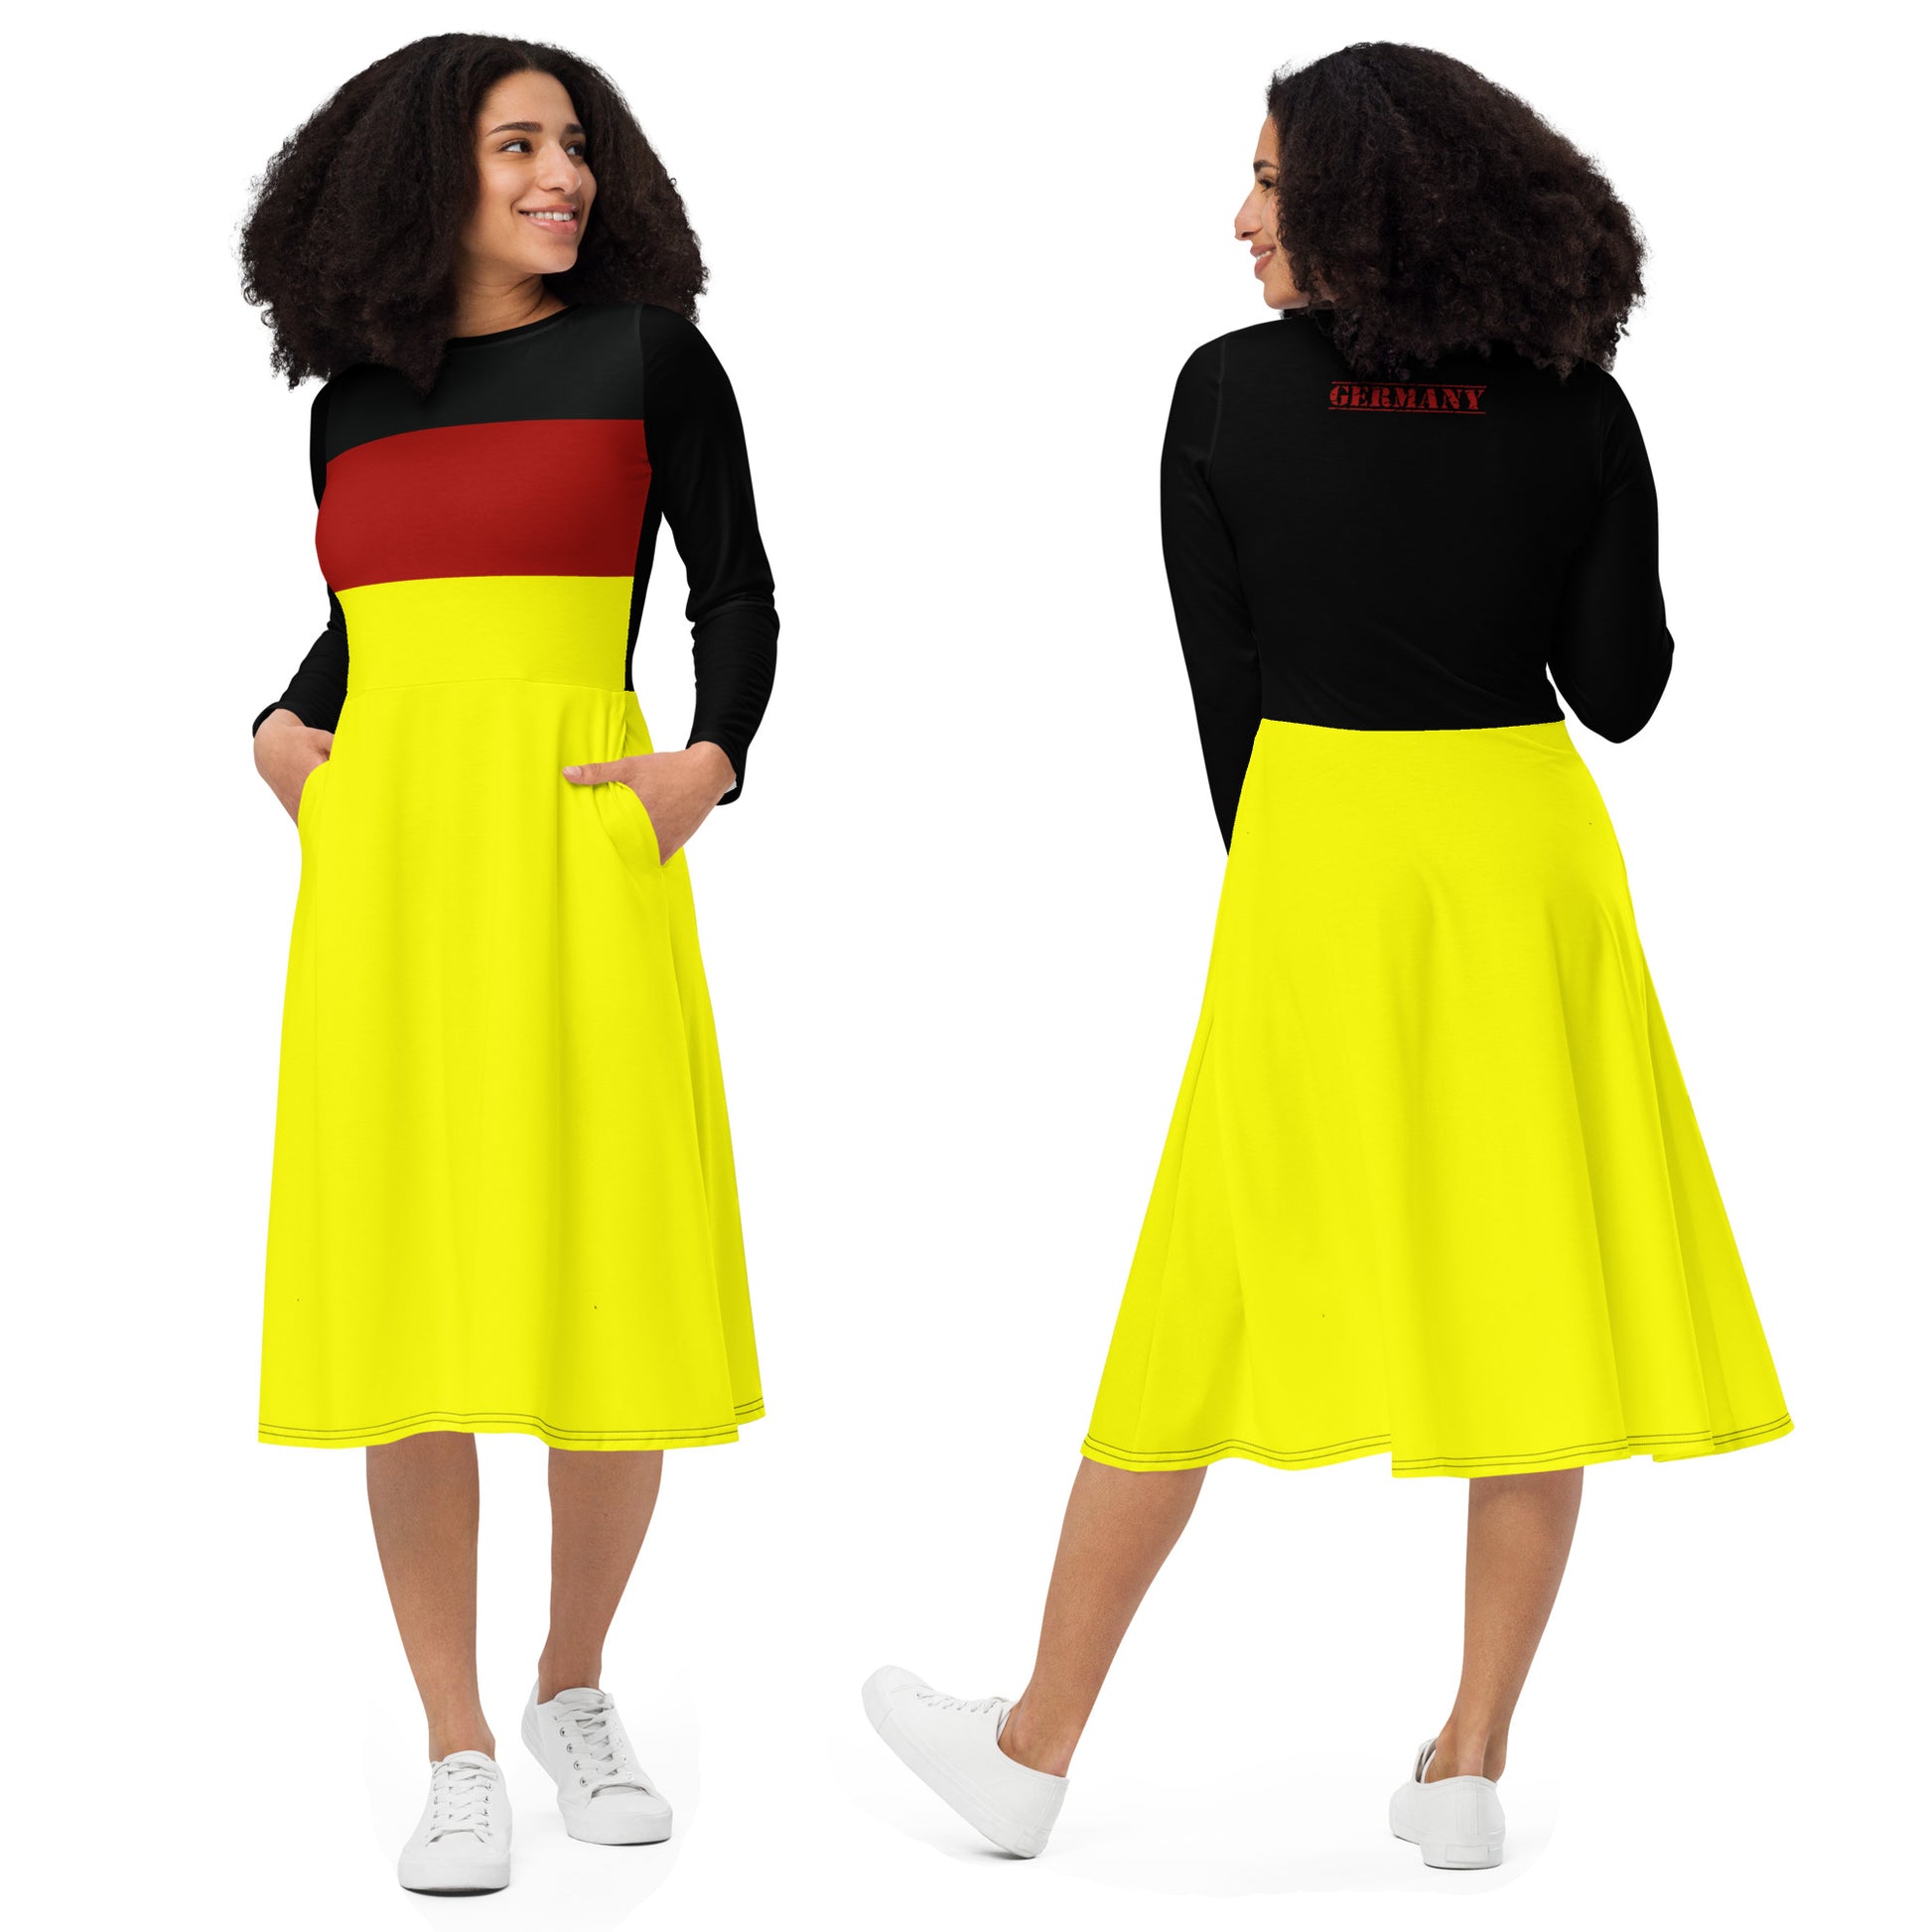 German Dress With Germany Flag / Long Sleeves Dress With Pockets / Small - Plus size